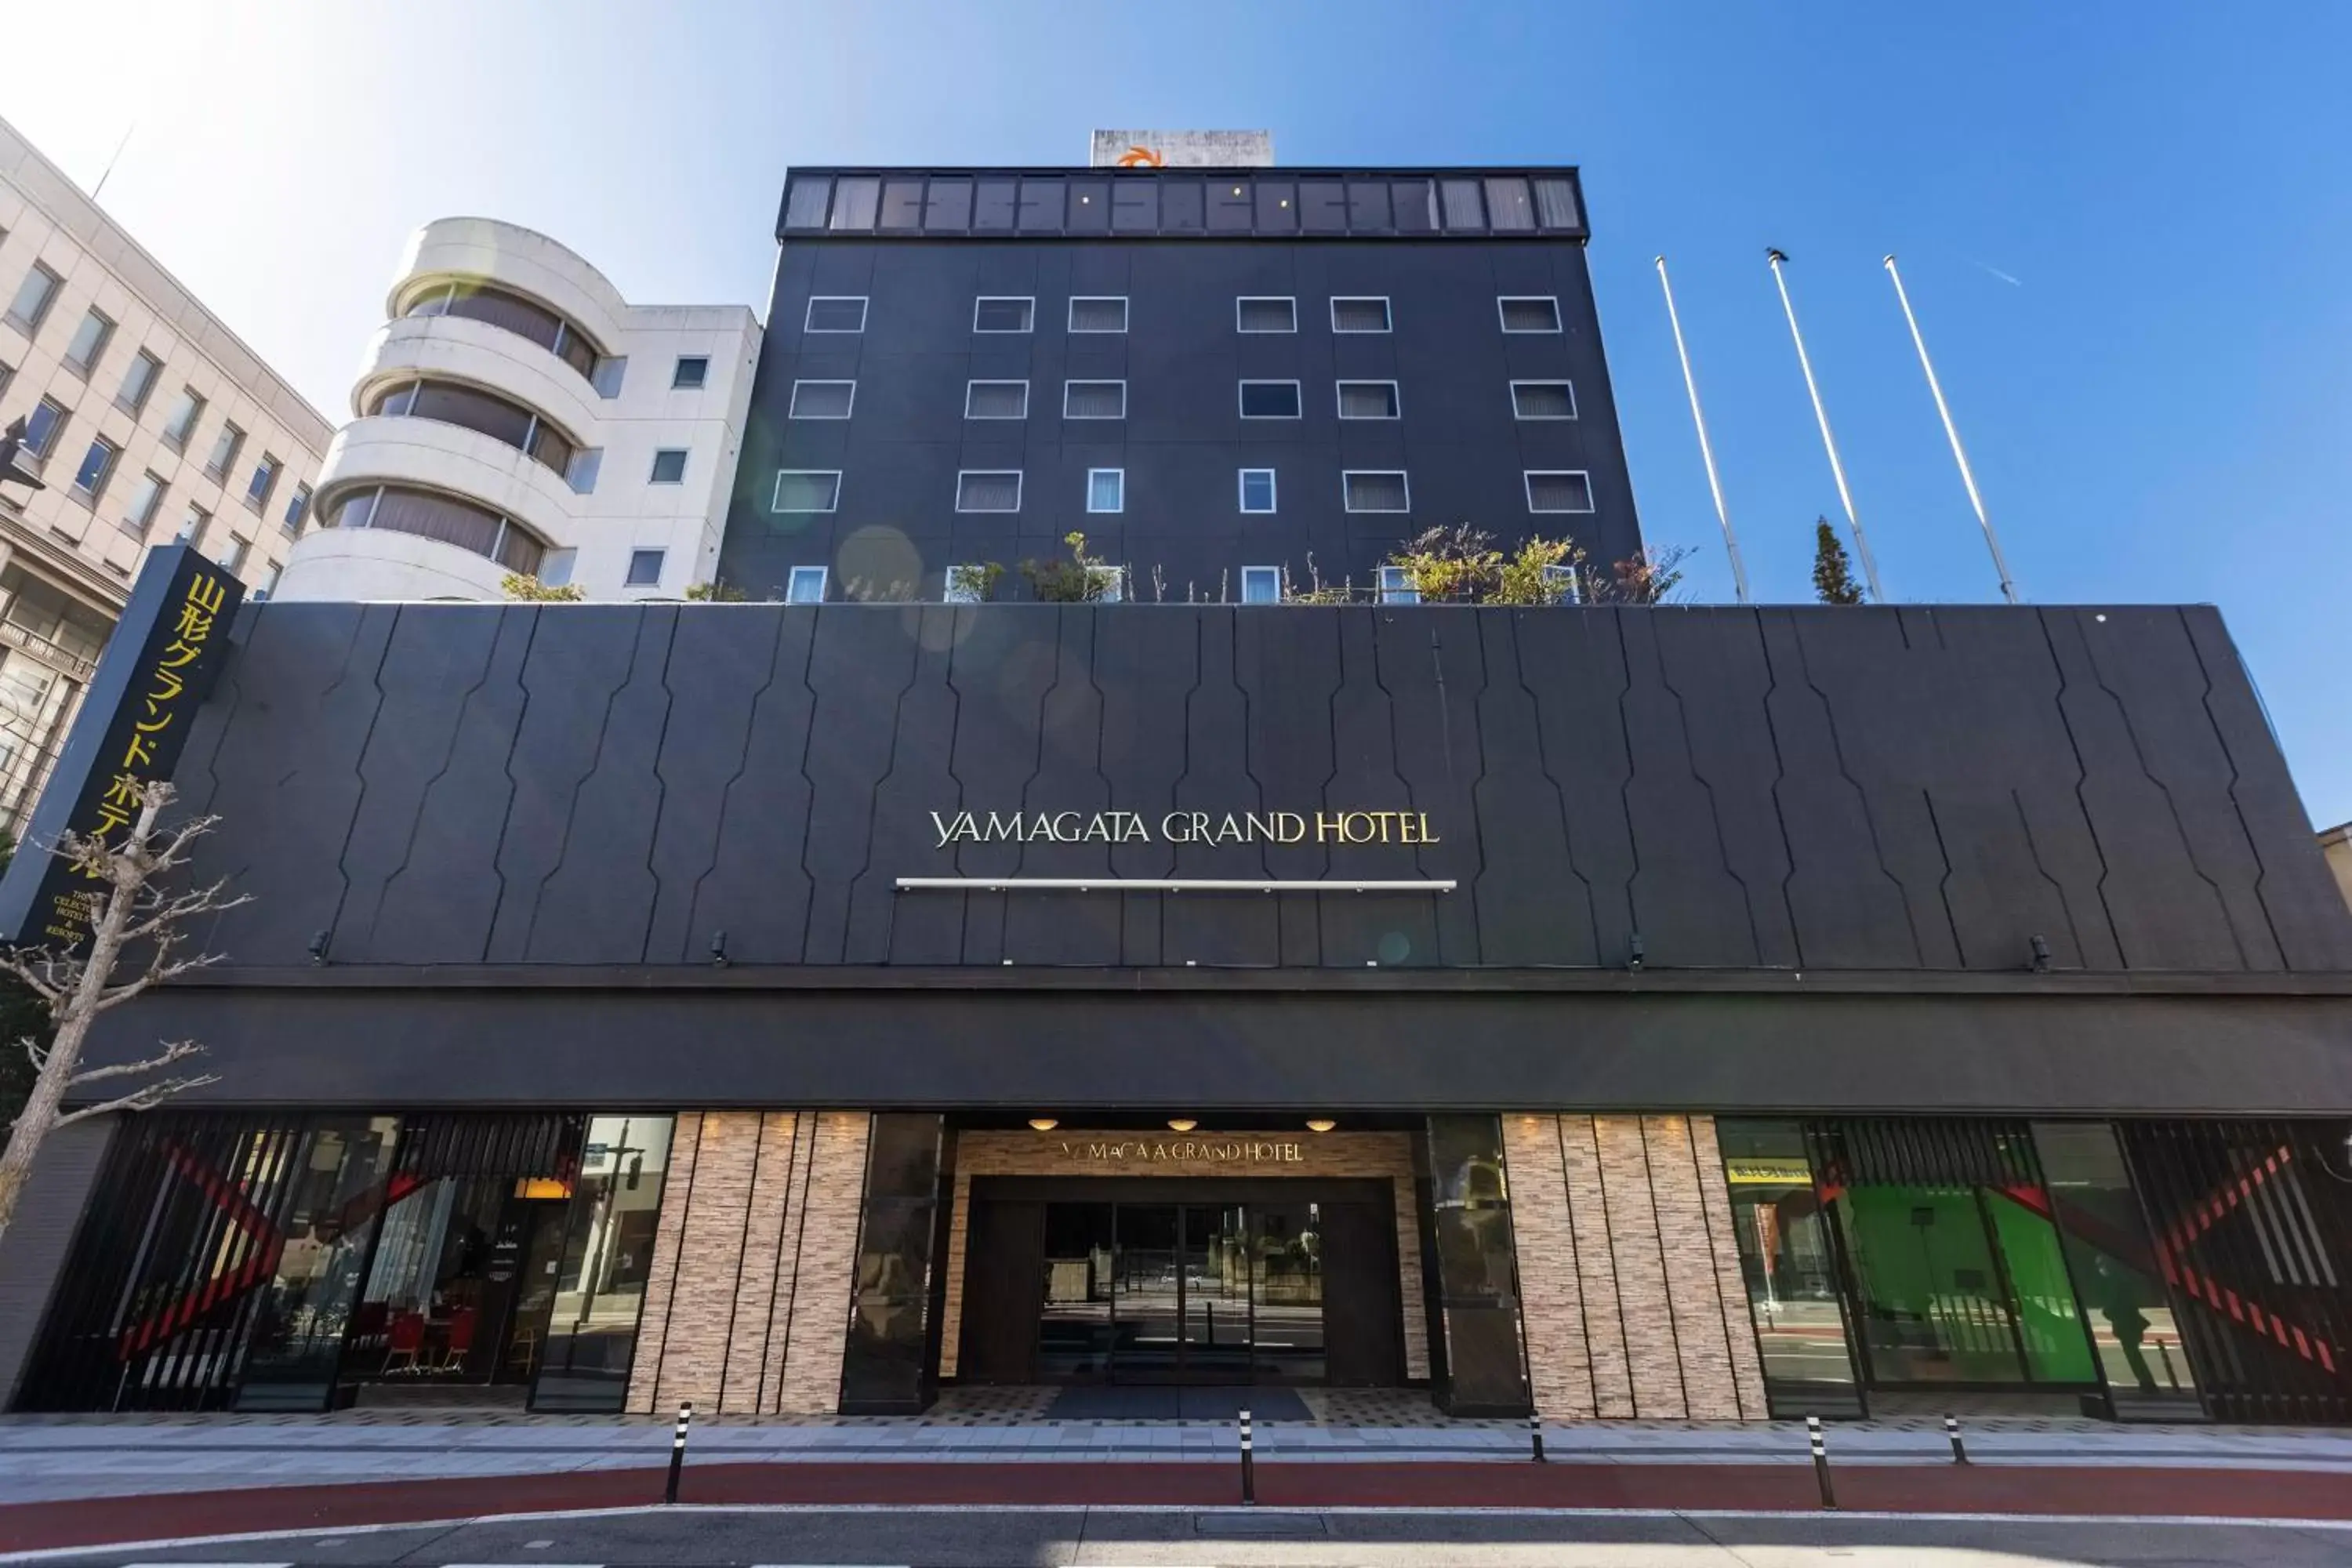 Property Building in Yamagata Grand Hotel